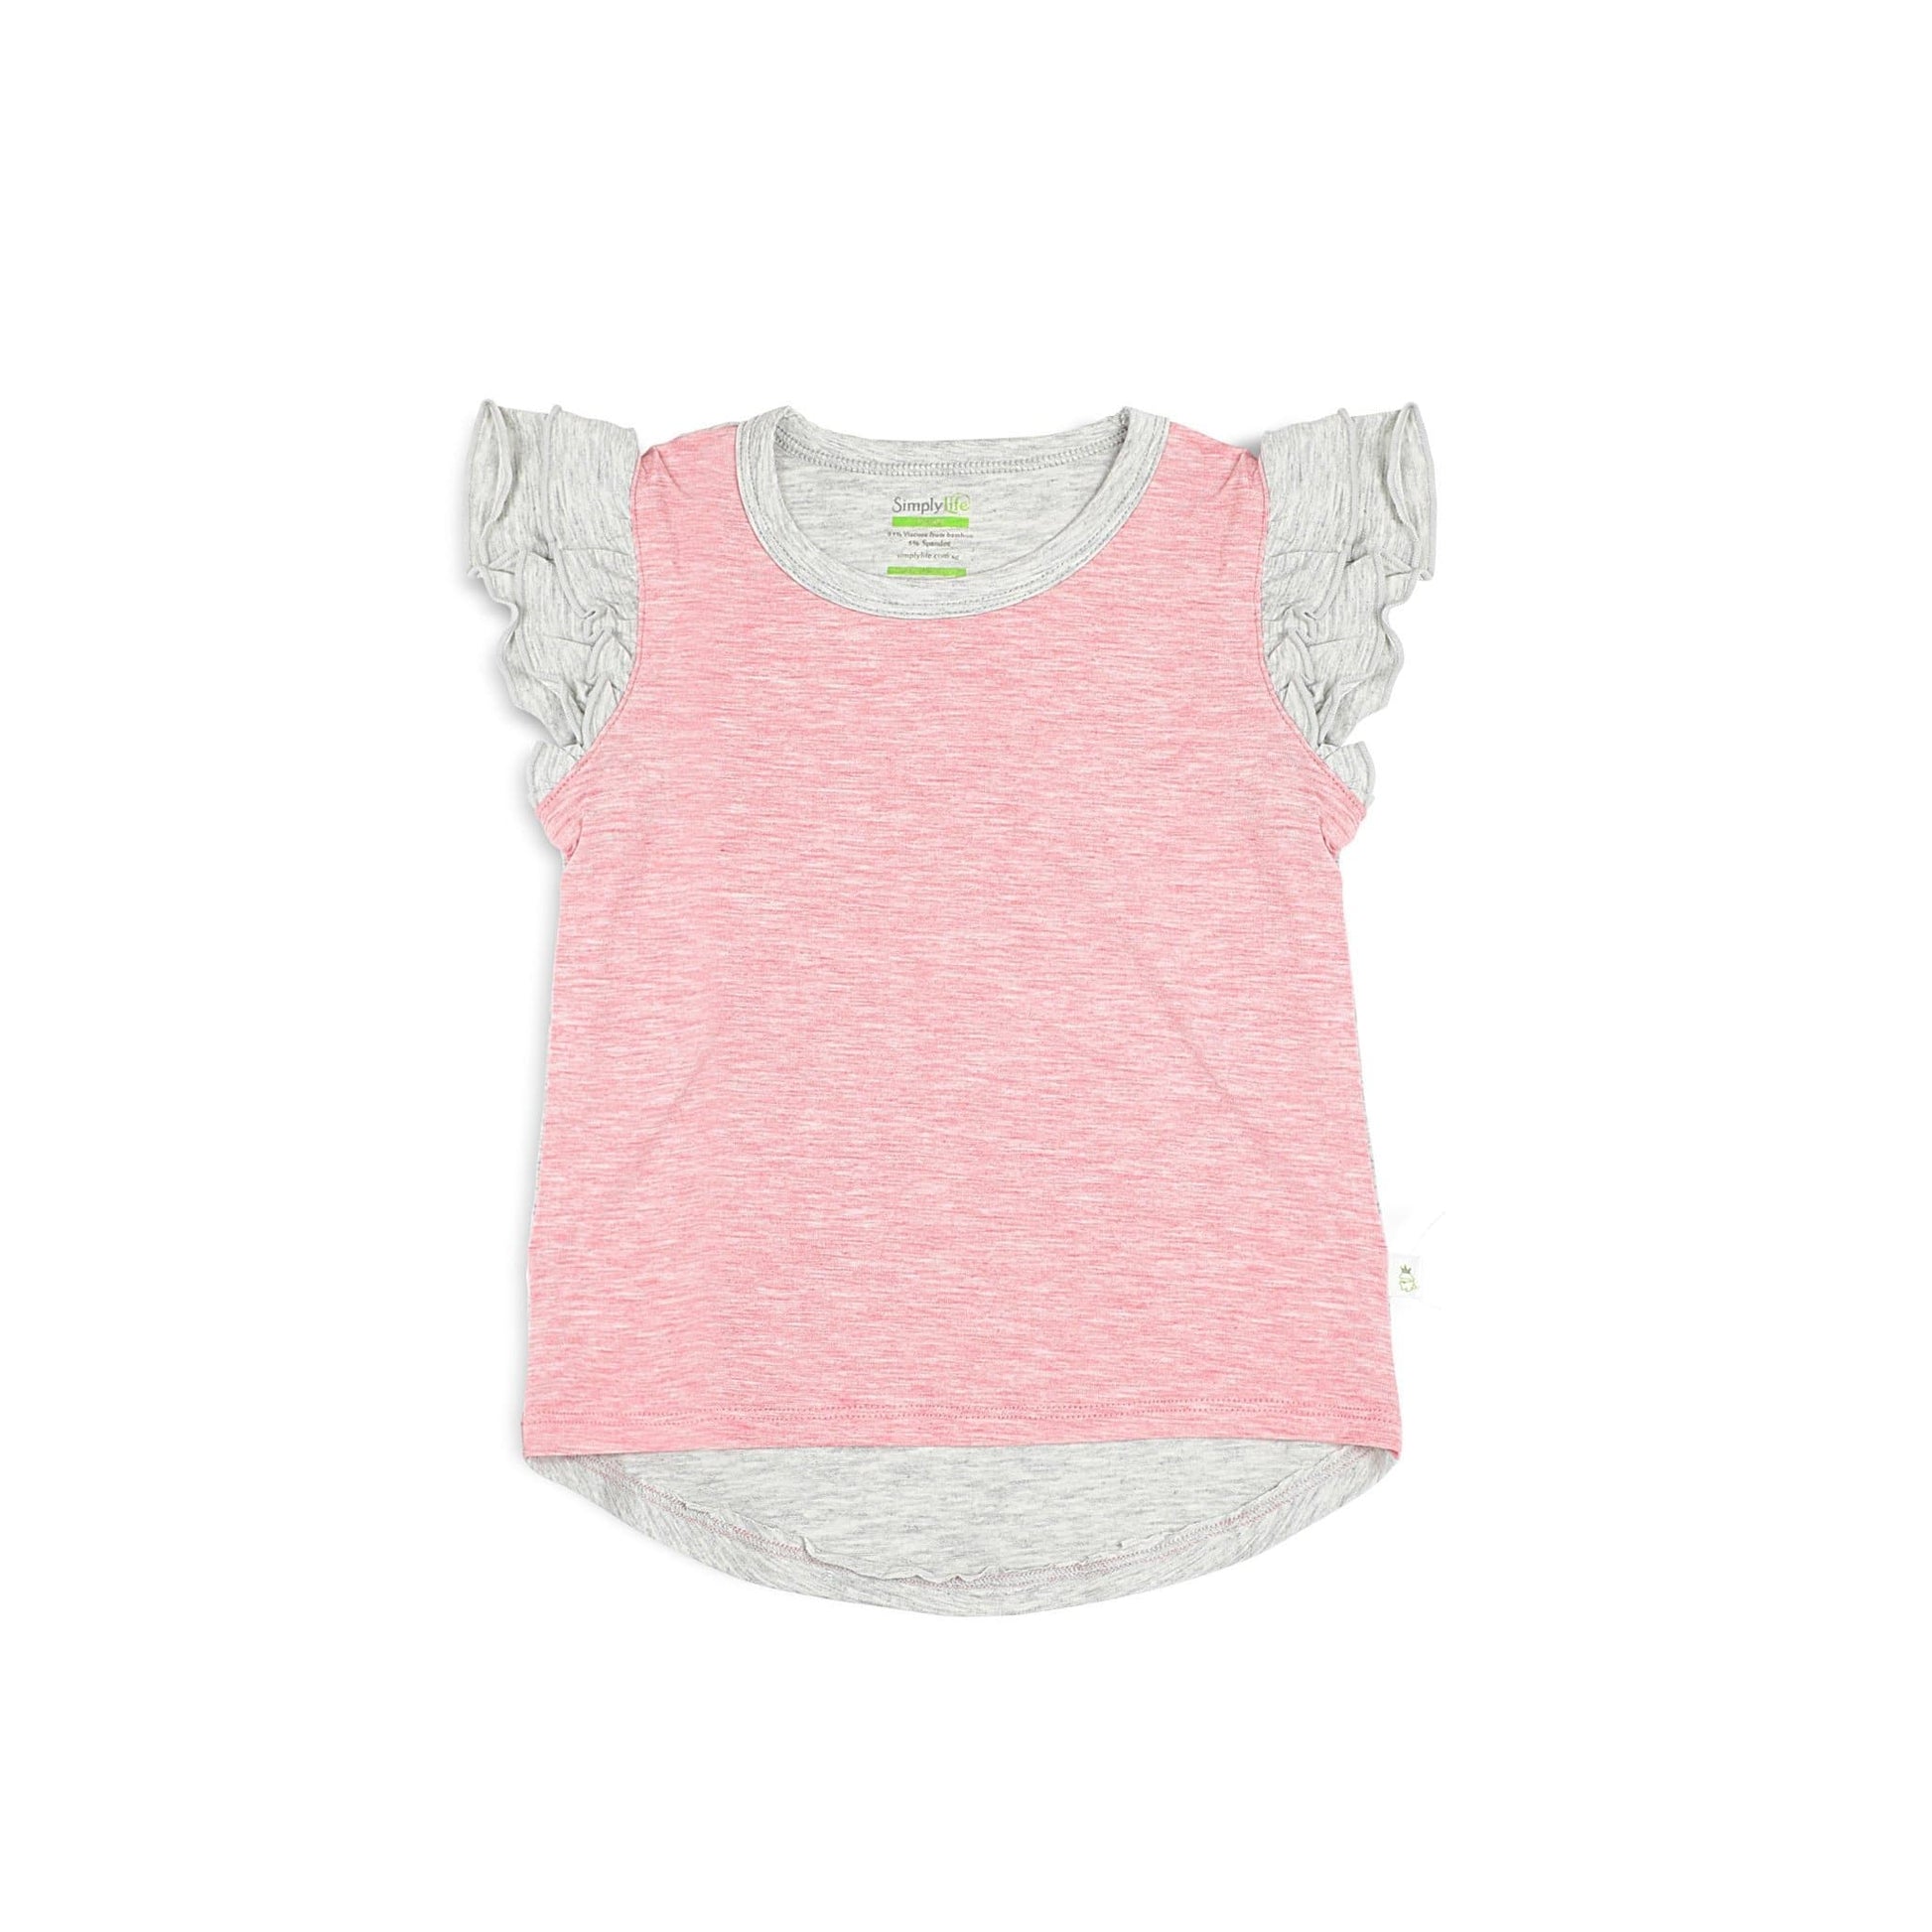 Girls' Tee with Double Frill Sleeves by simplylifebaby